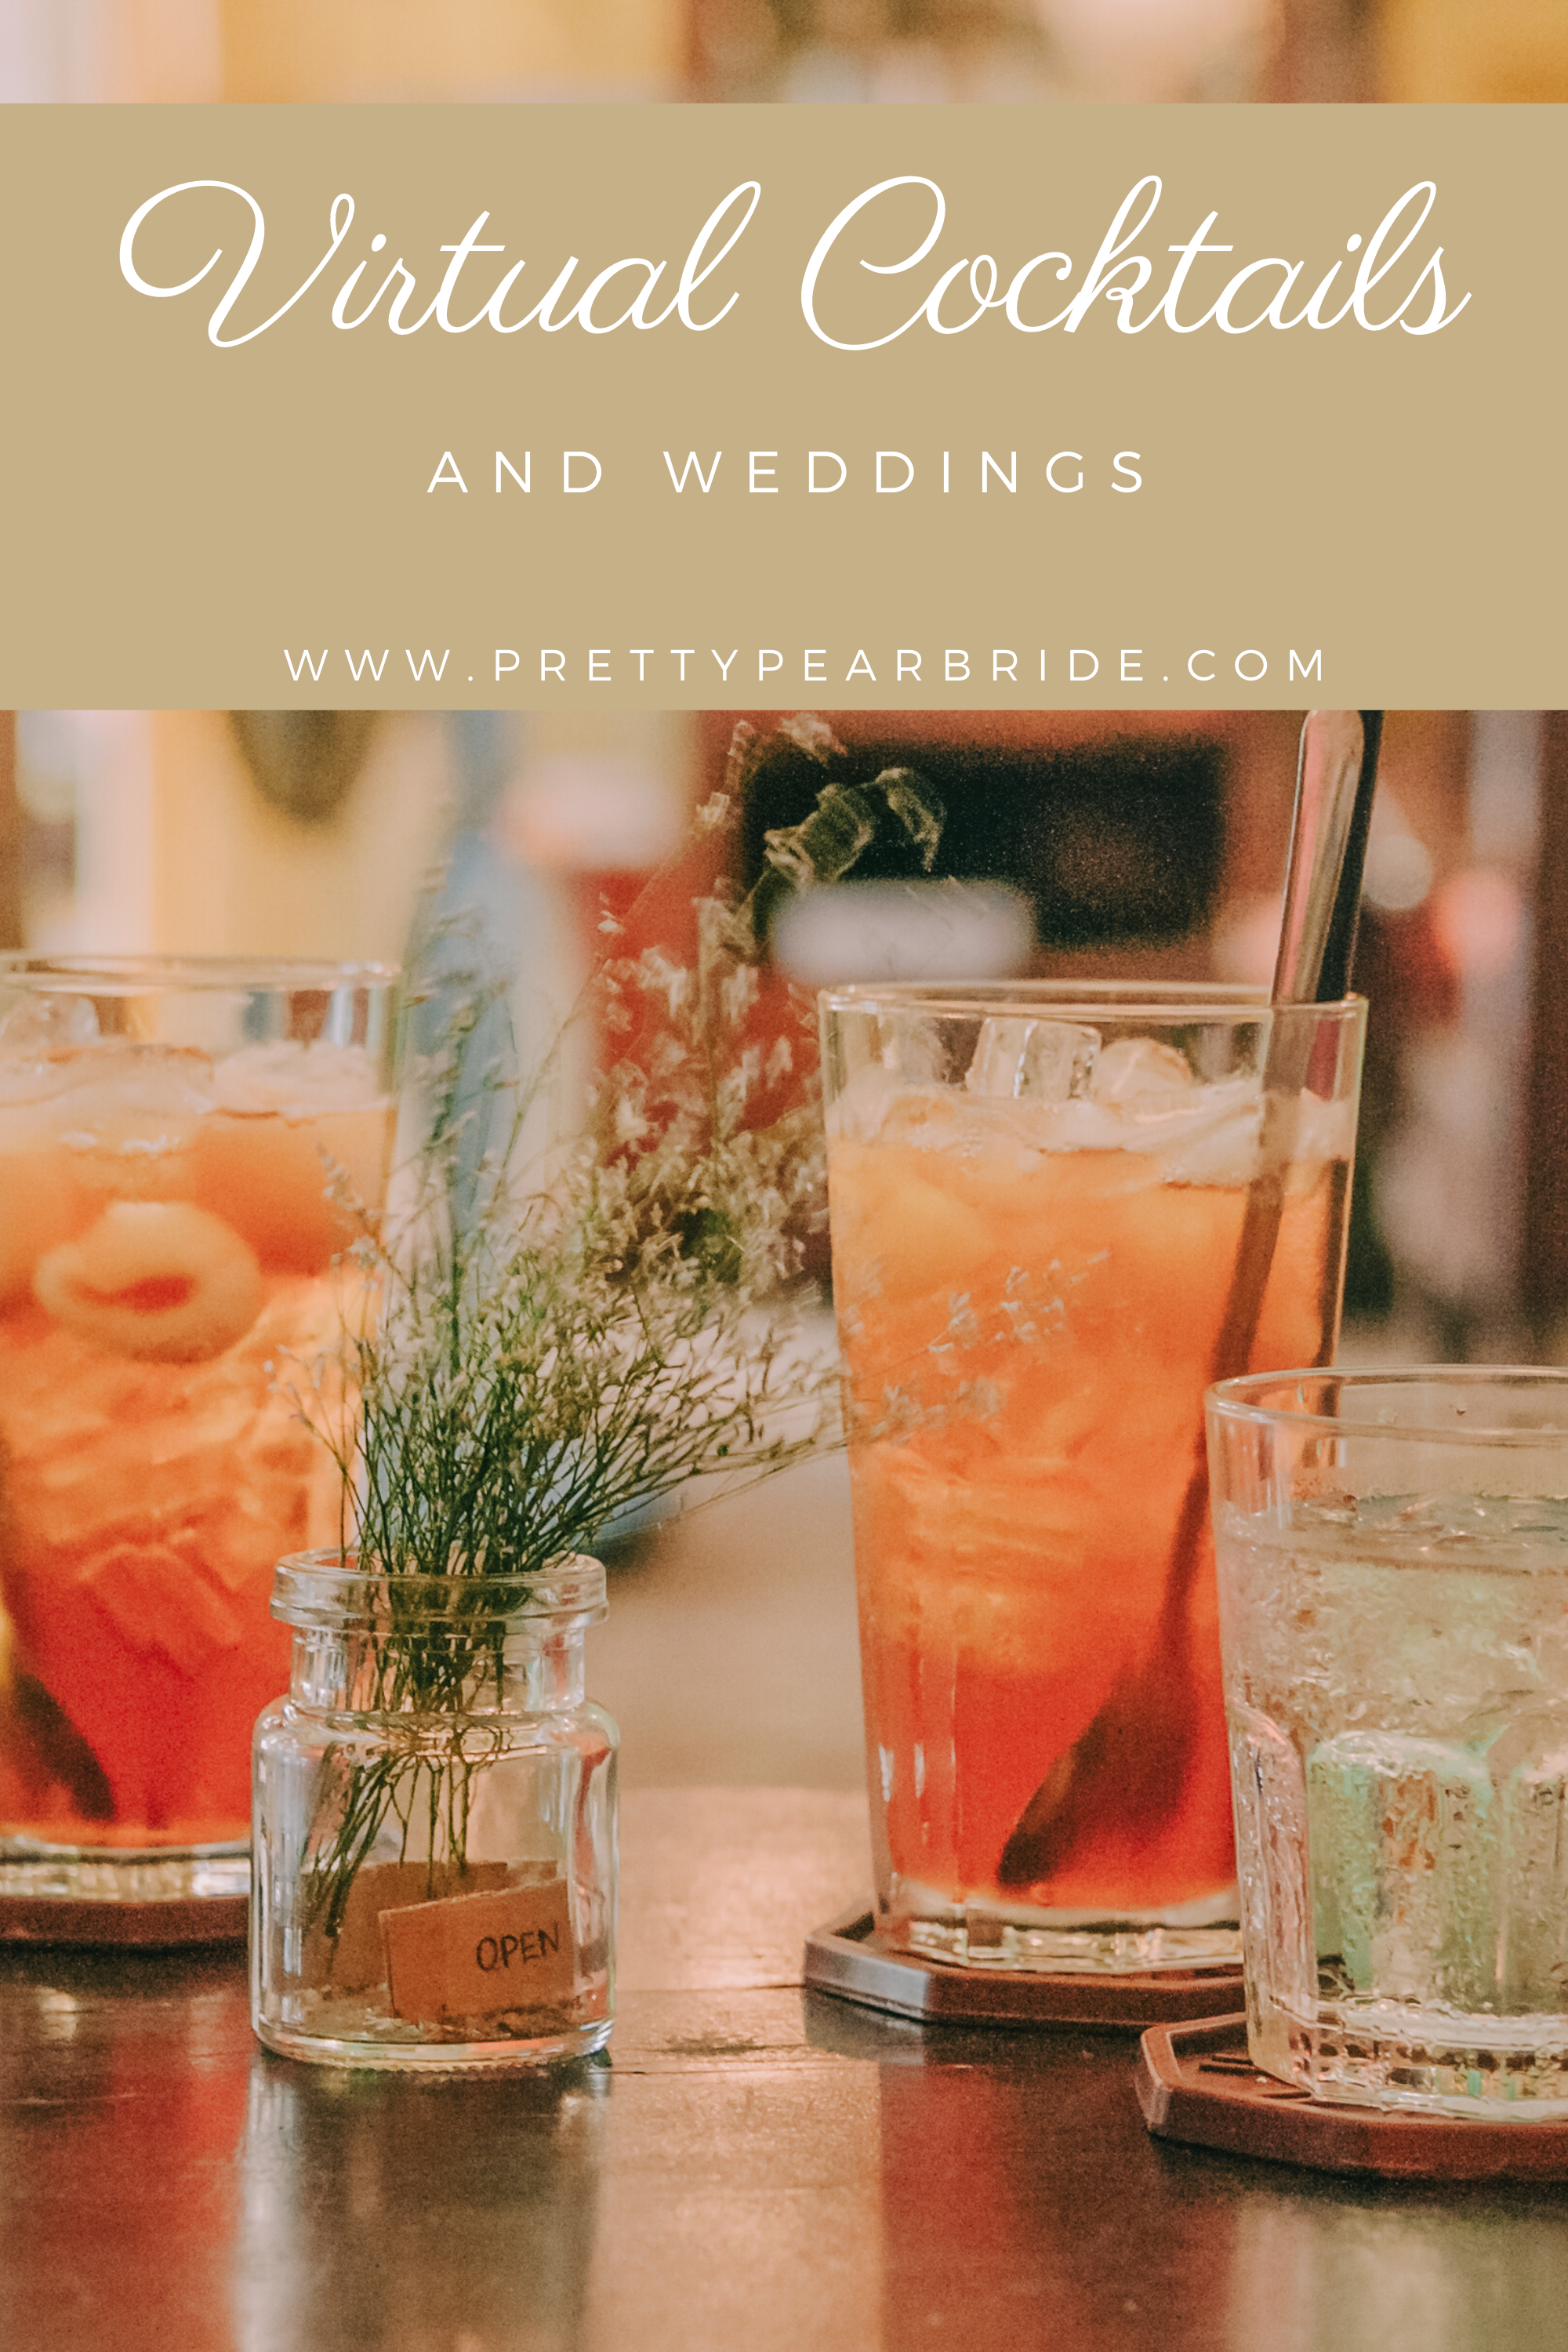 Virtual Cocktails and Weddings